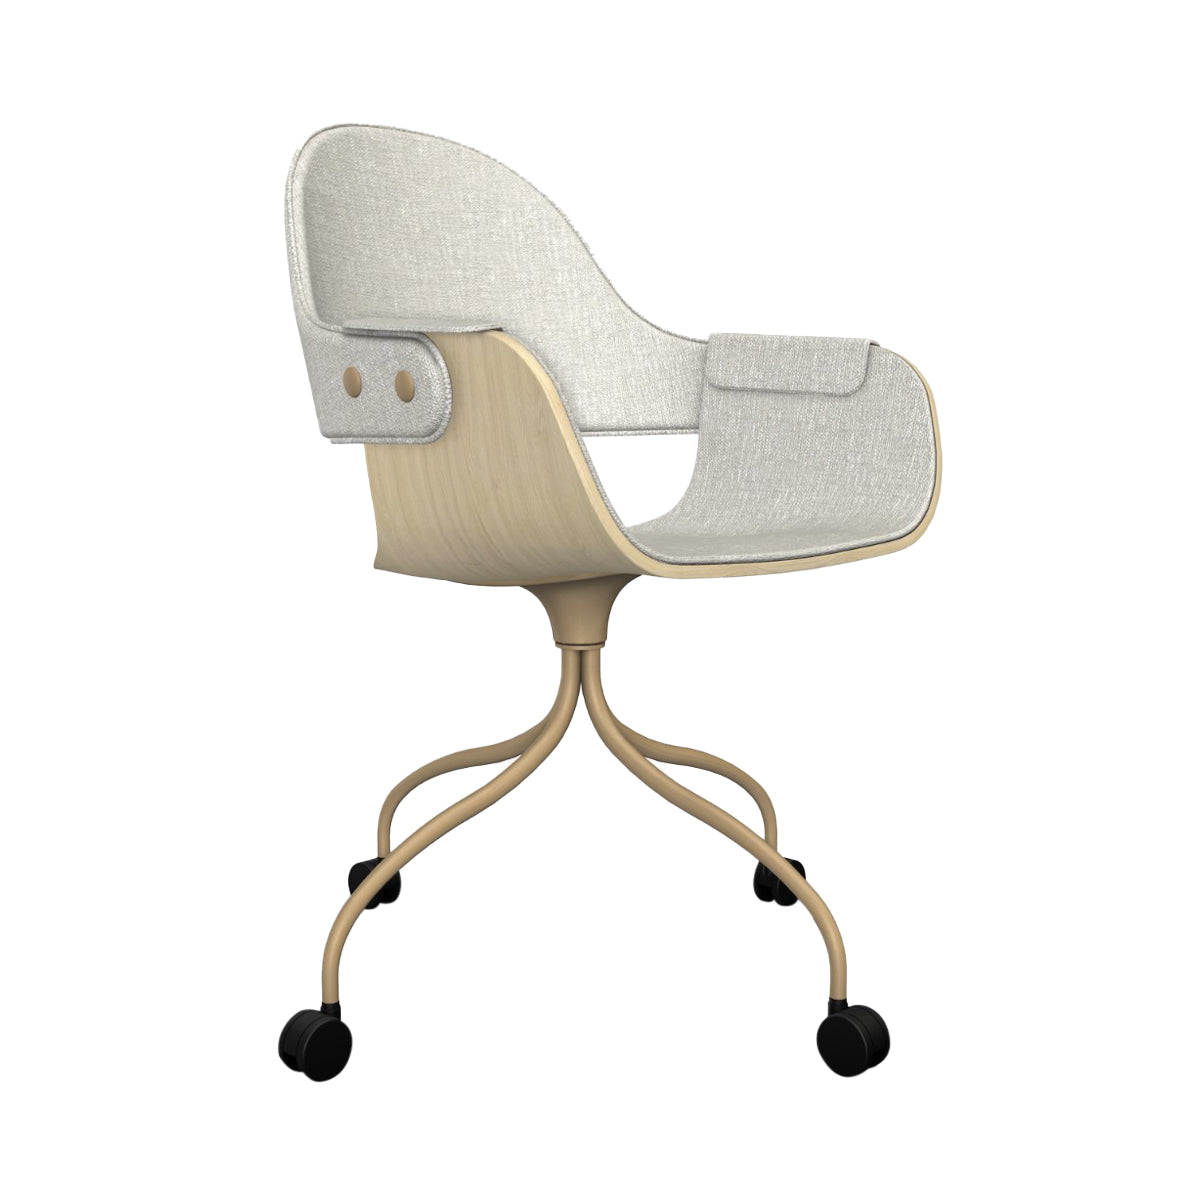 Showtime Nude Chair with Wheel: Full Upholstered + Natural Ash + Beige